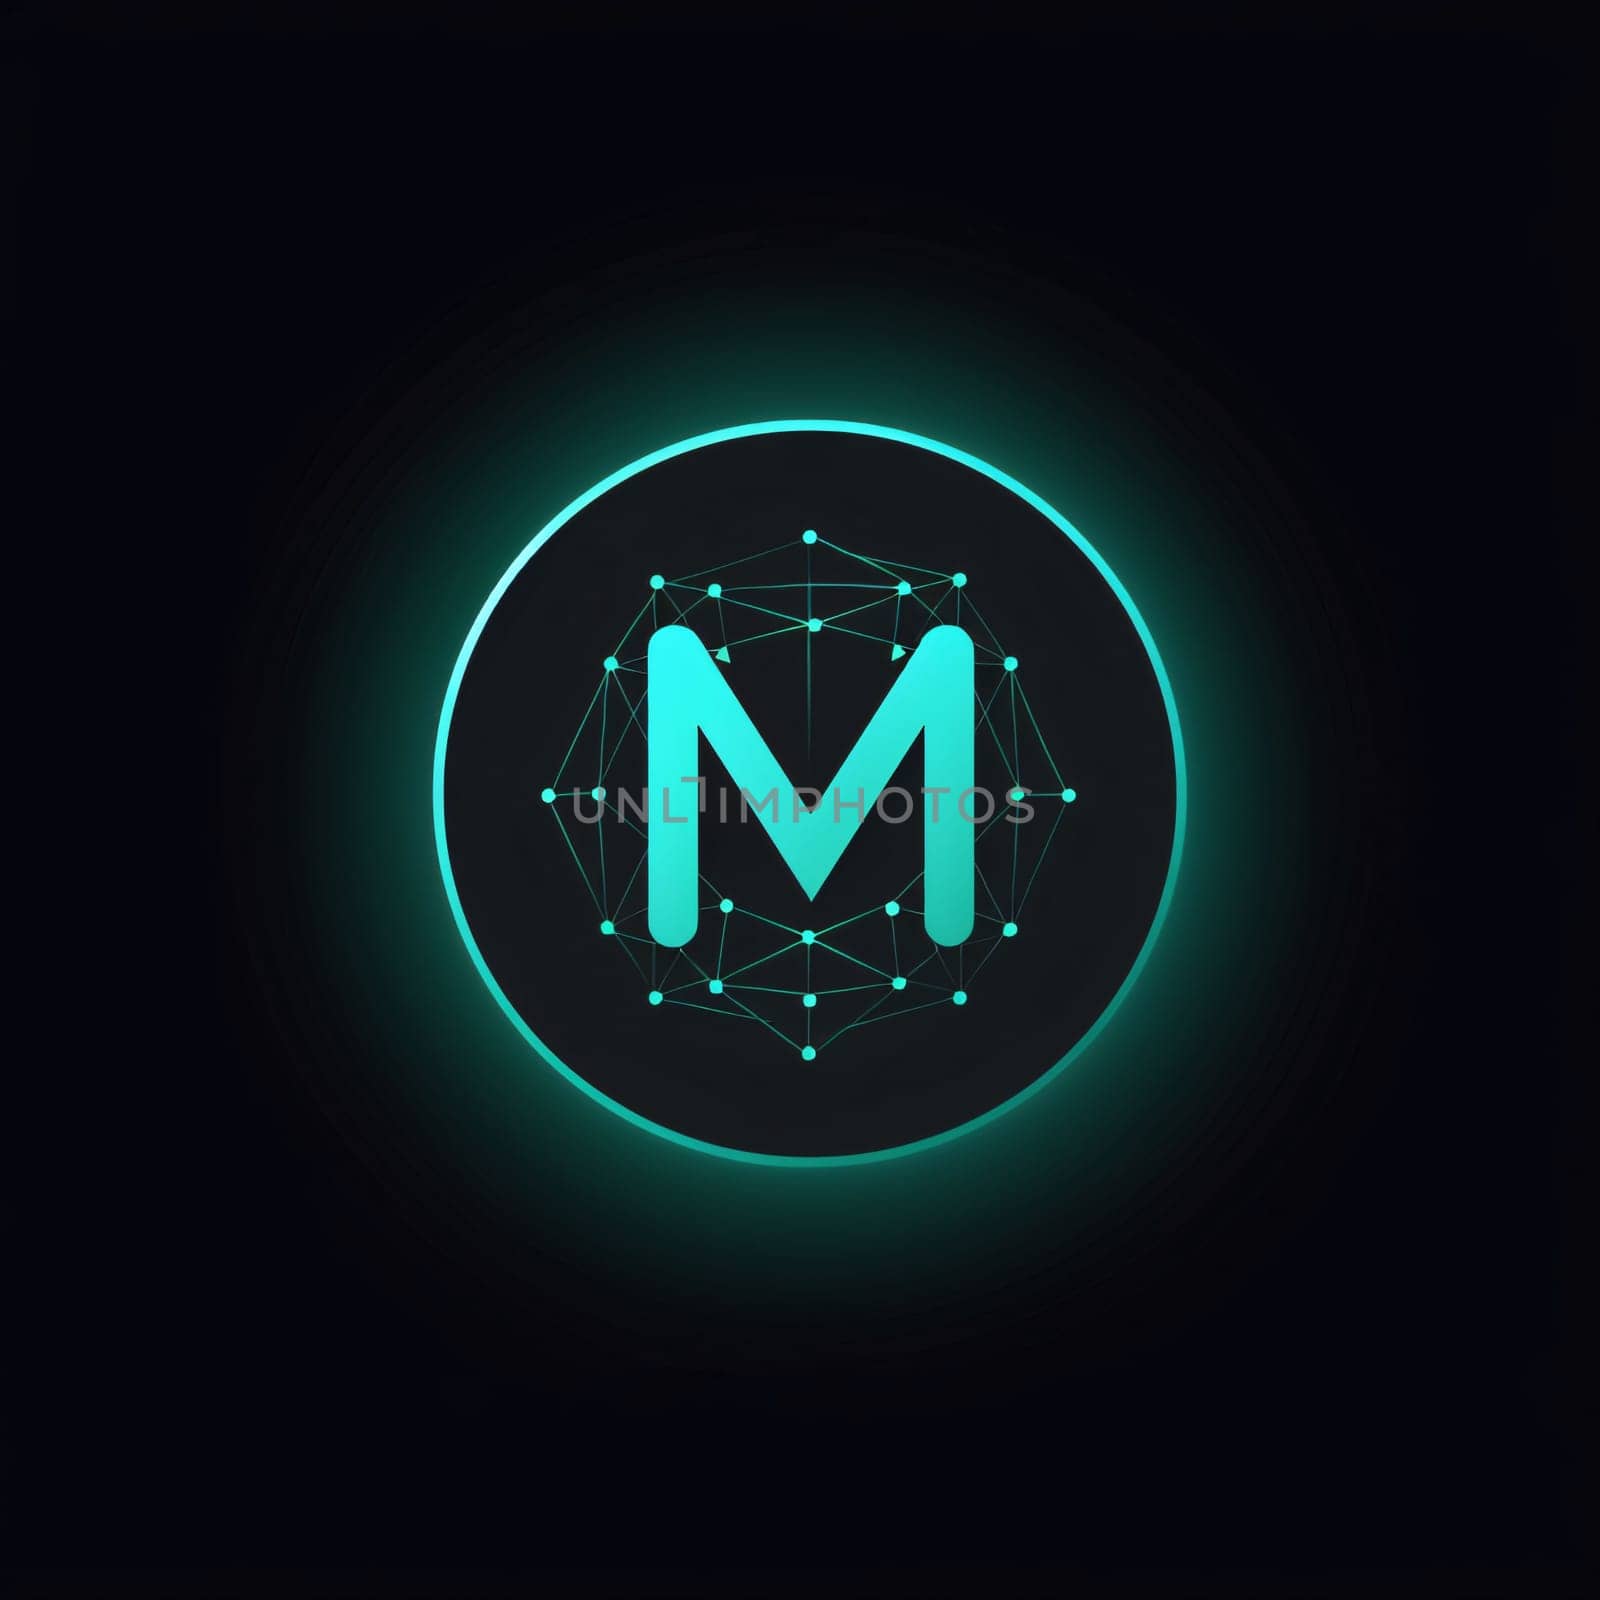 Graphic alphabet letters: Blue neon letter M in circle form on dark background. Vector illustration